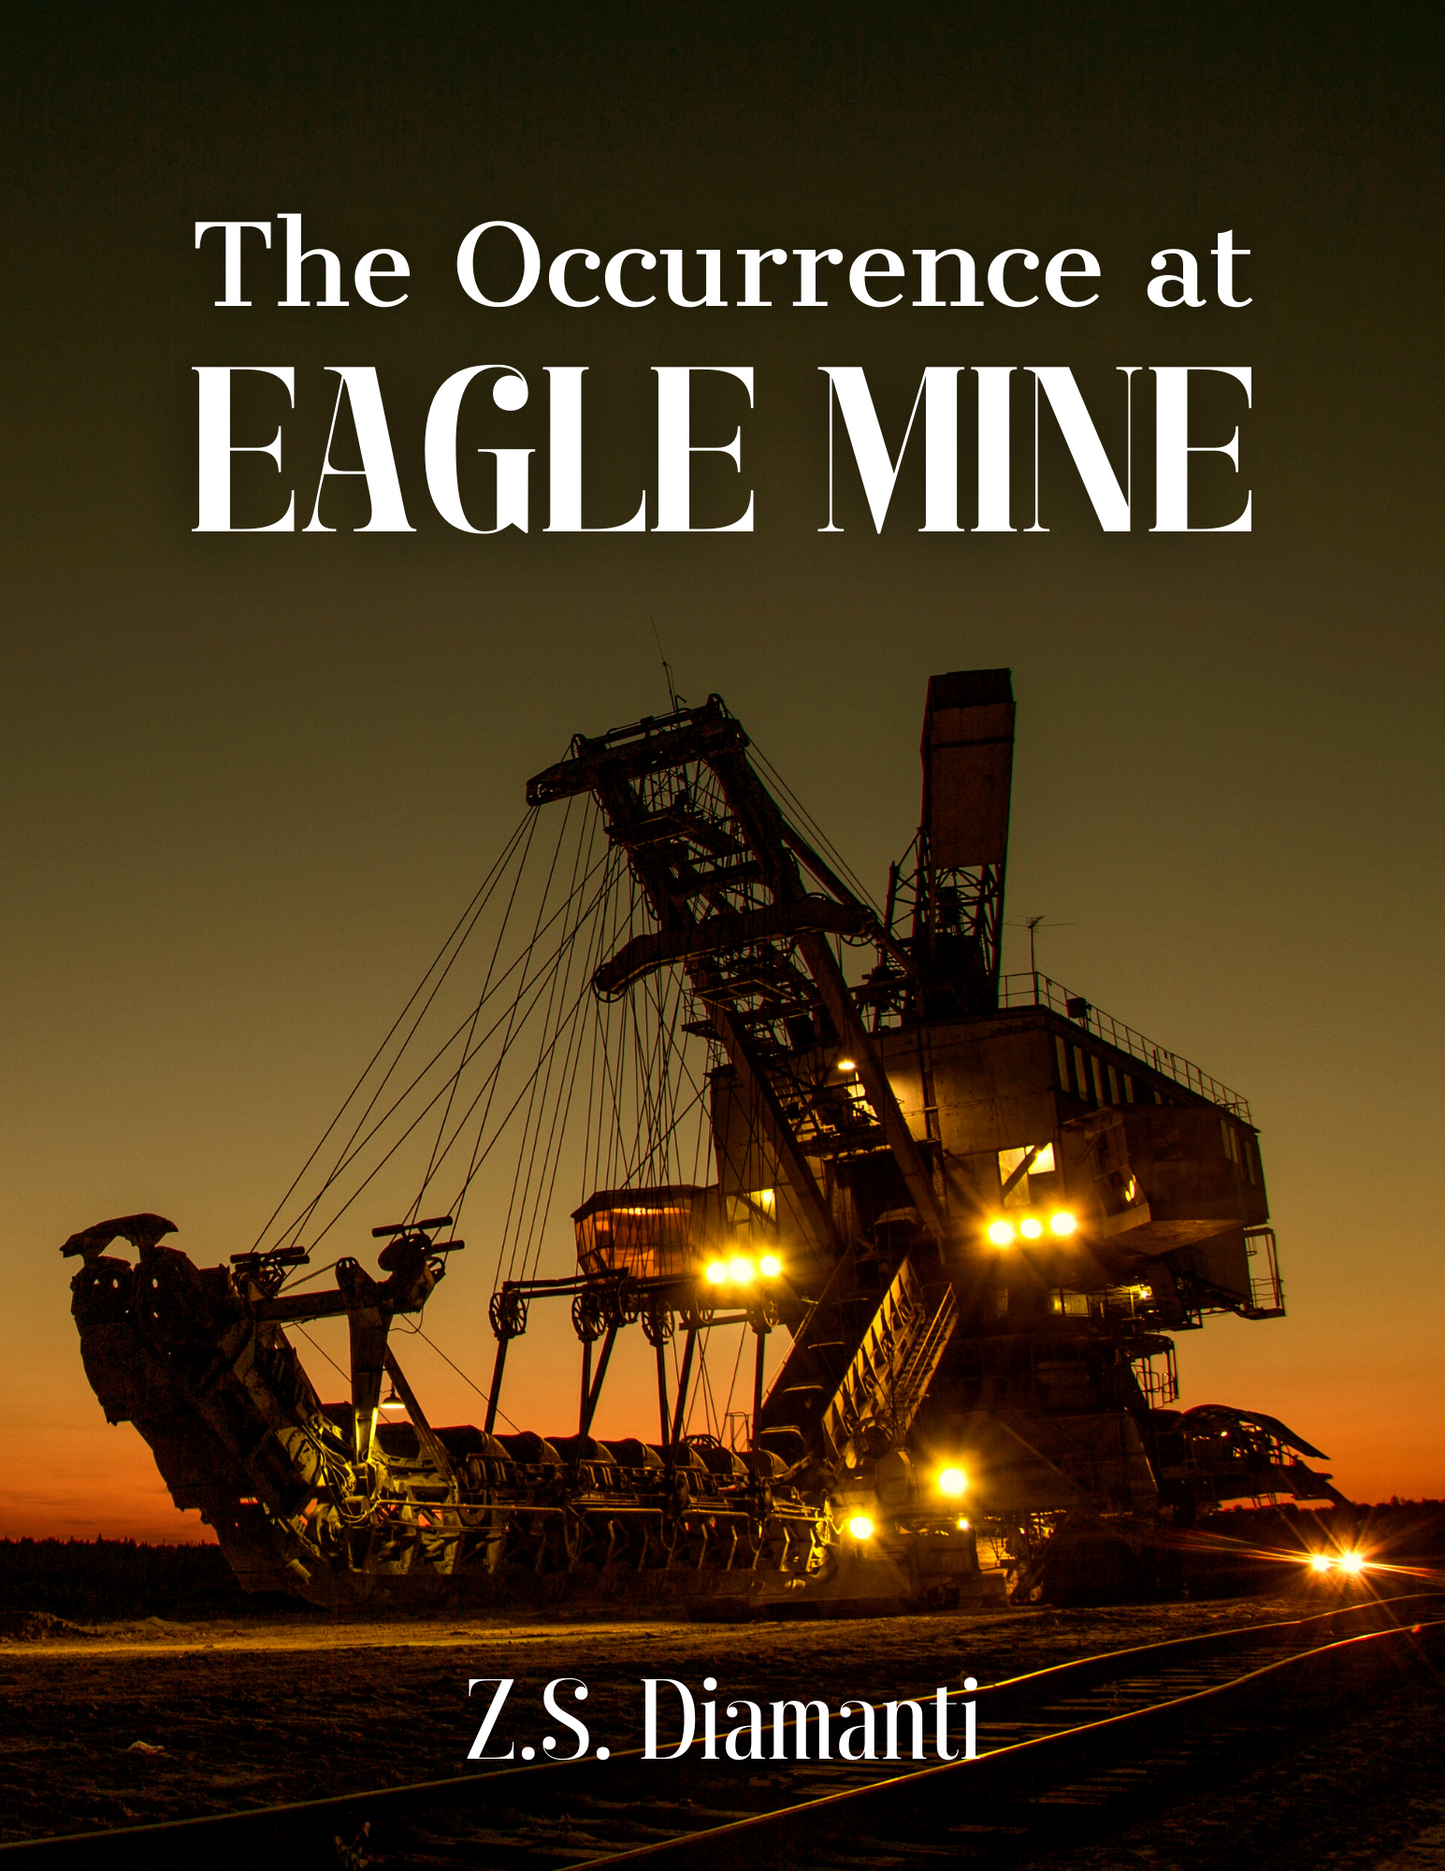 The Occurrence at Eagle Mine